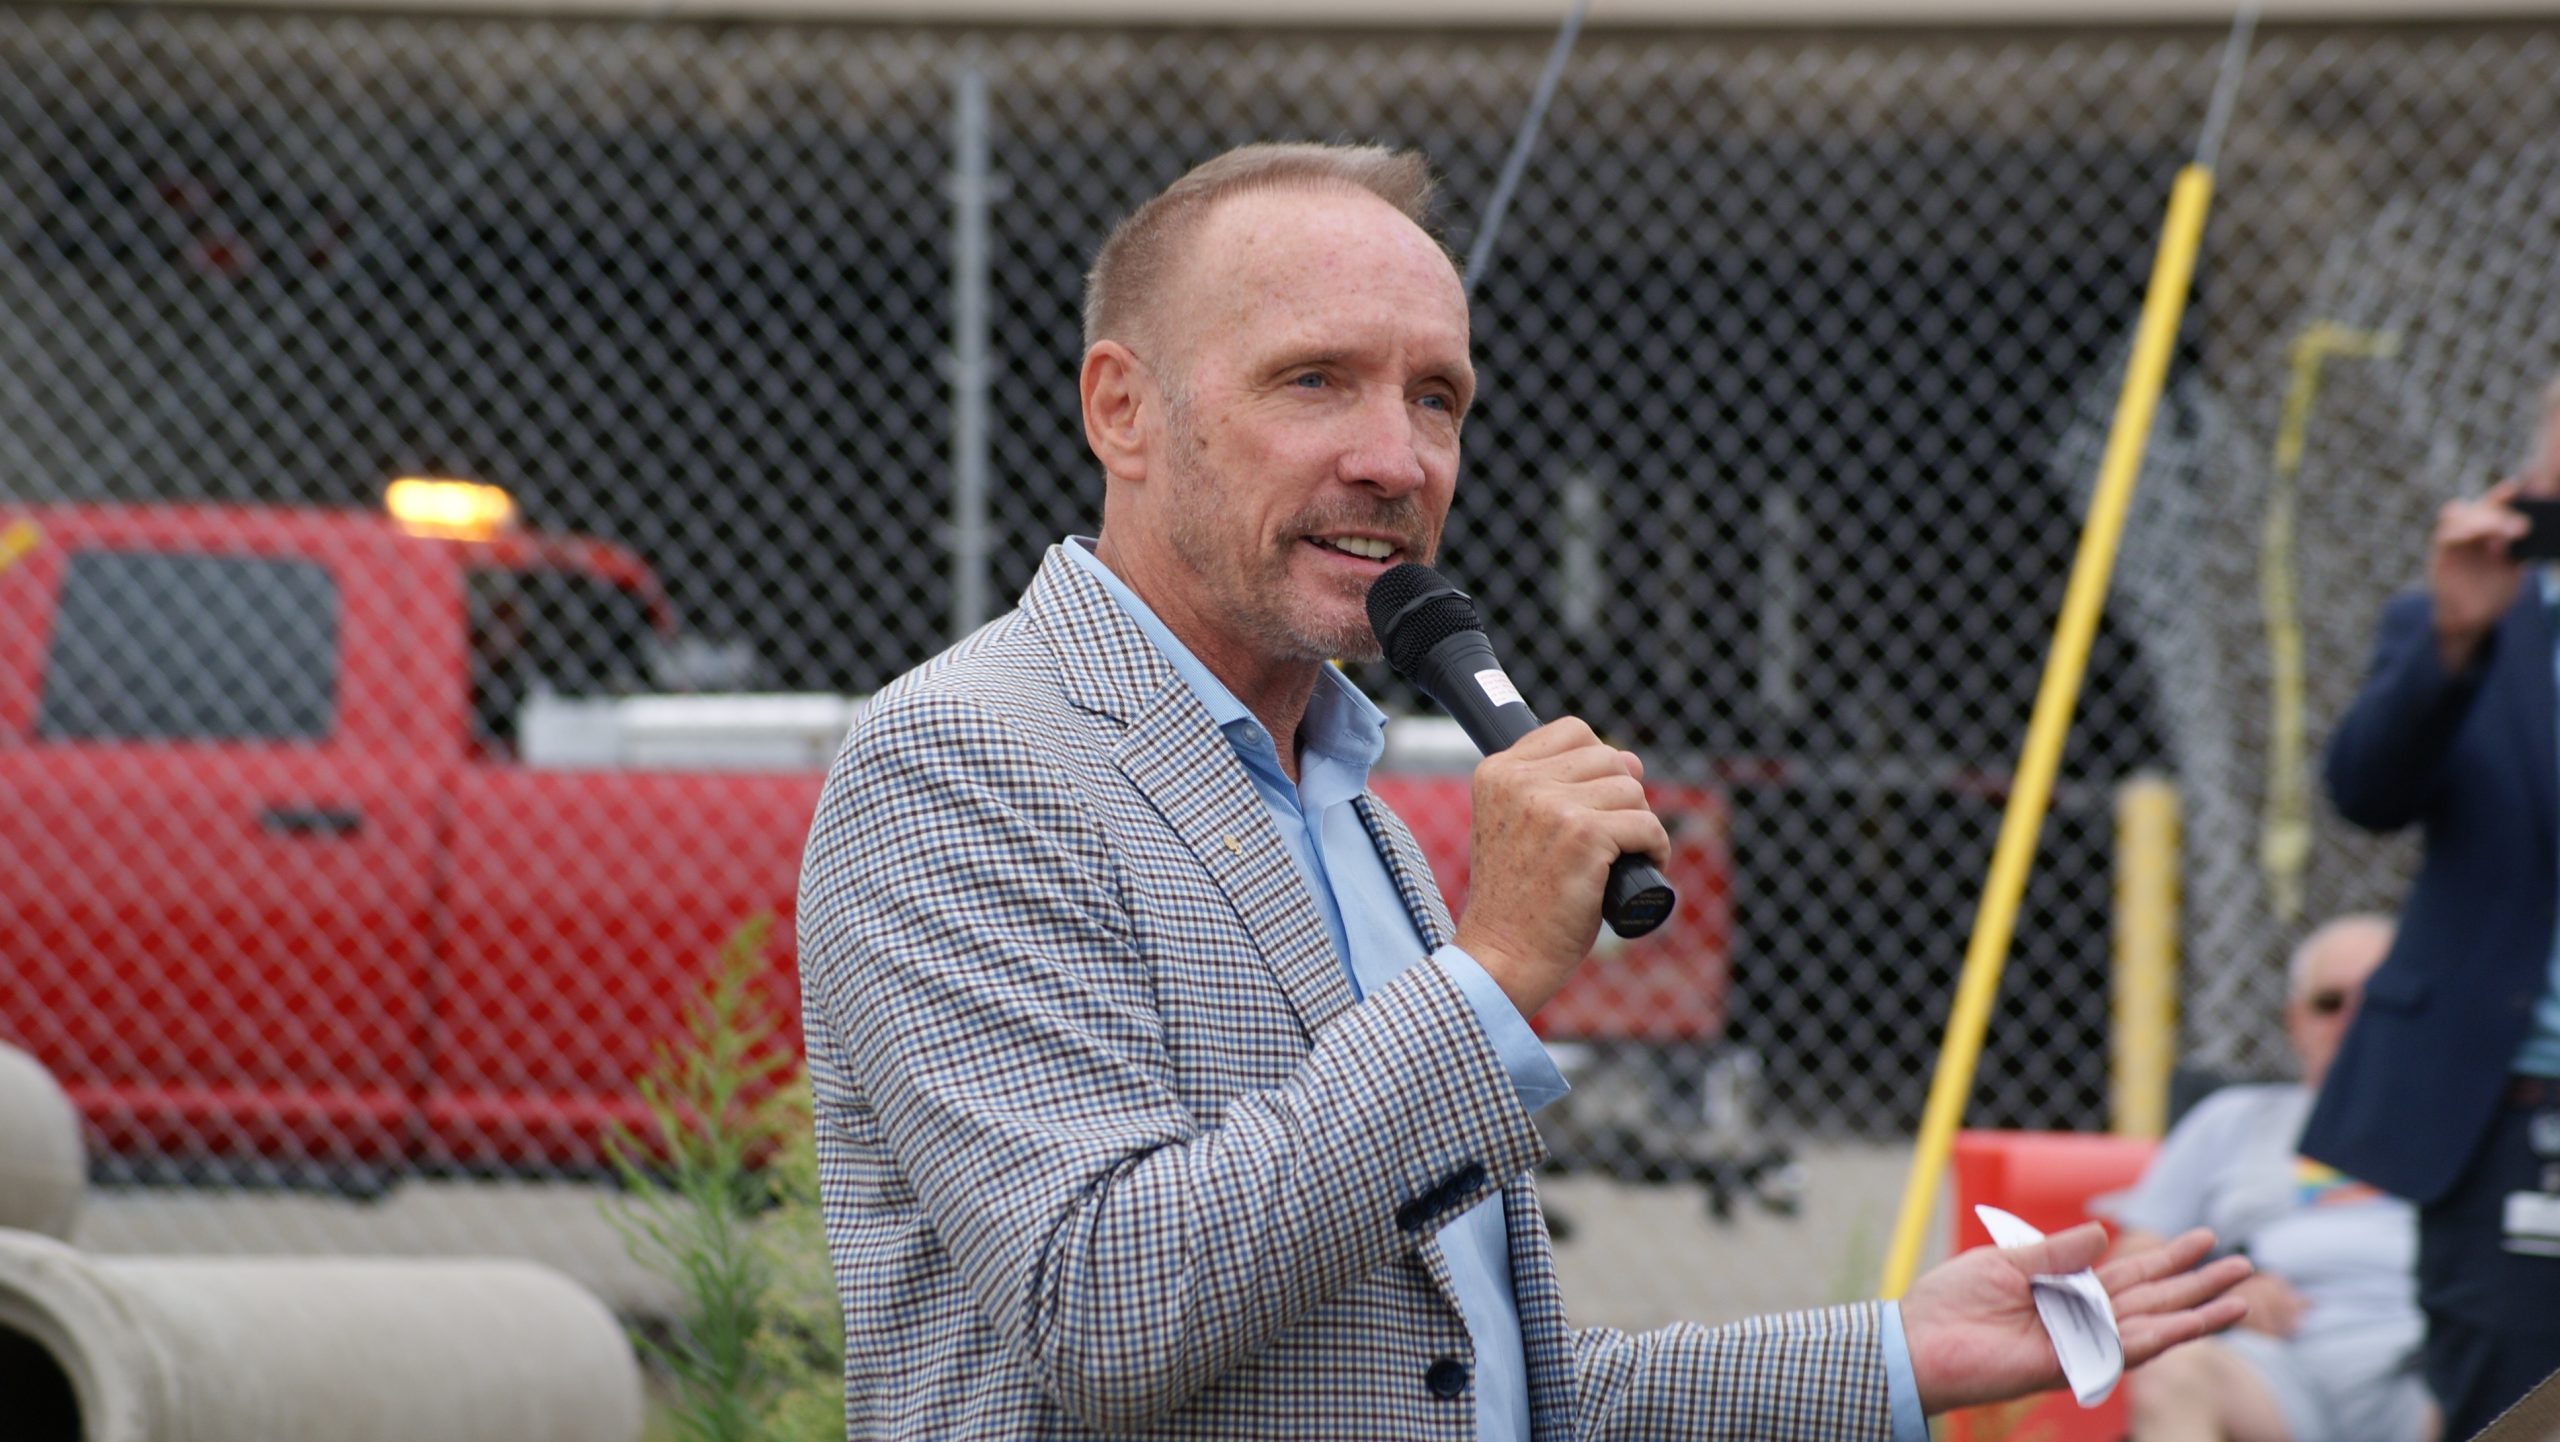 Oakland County Executive Dave Coulter speaks at a groundbreaking ceremony for an affordable housing project in Ferndale, Mich. on Aug. 23, 2023.